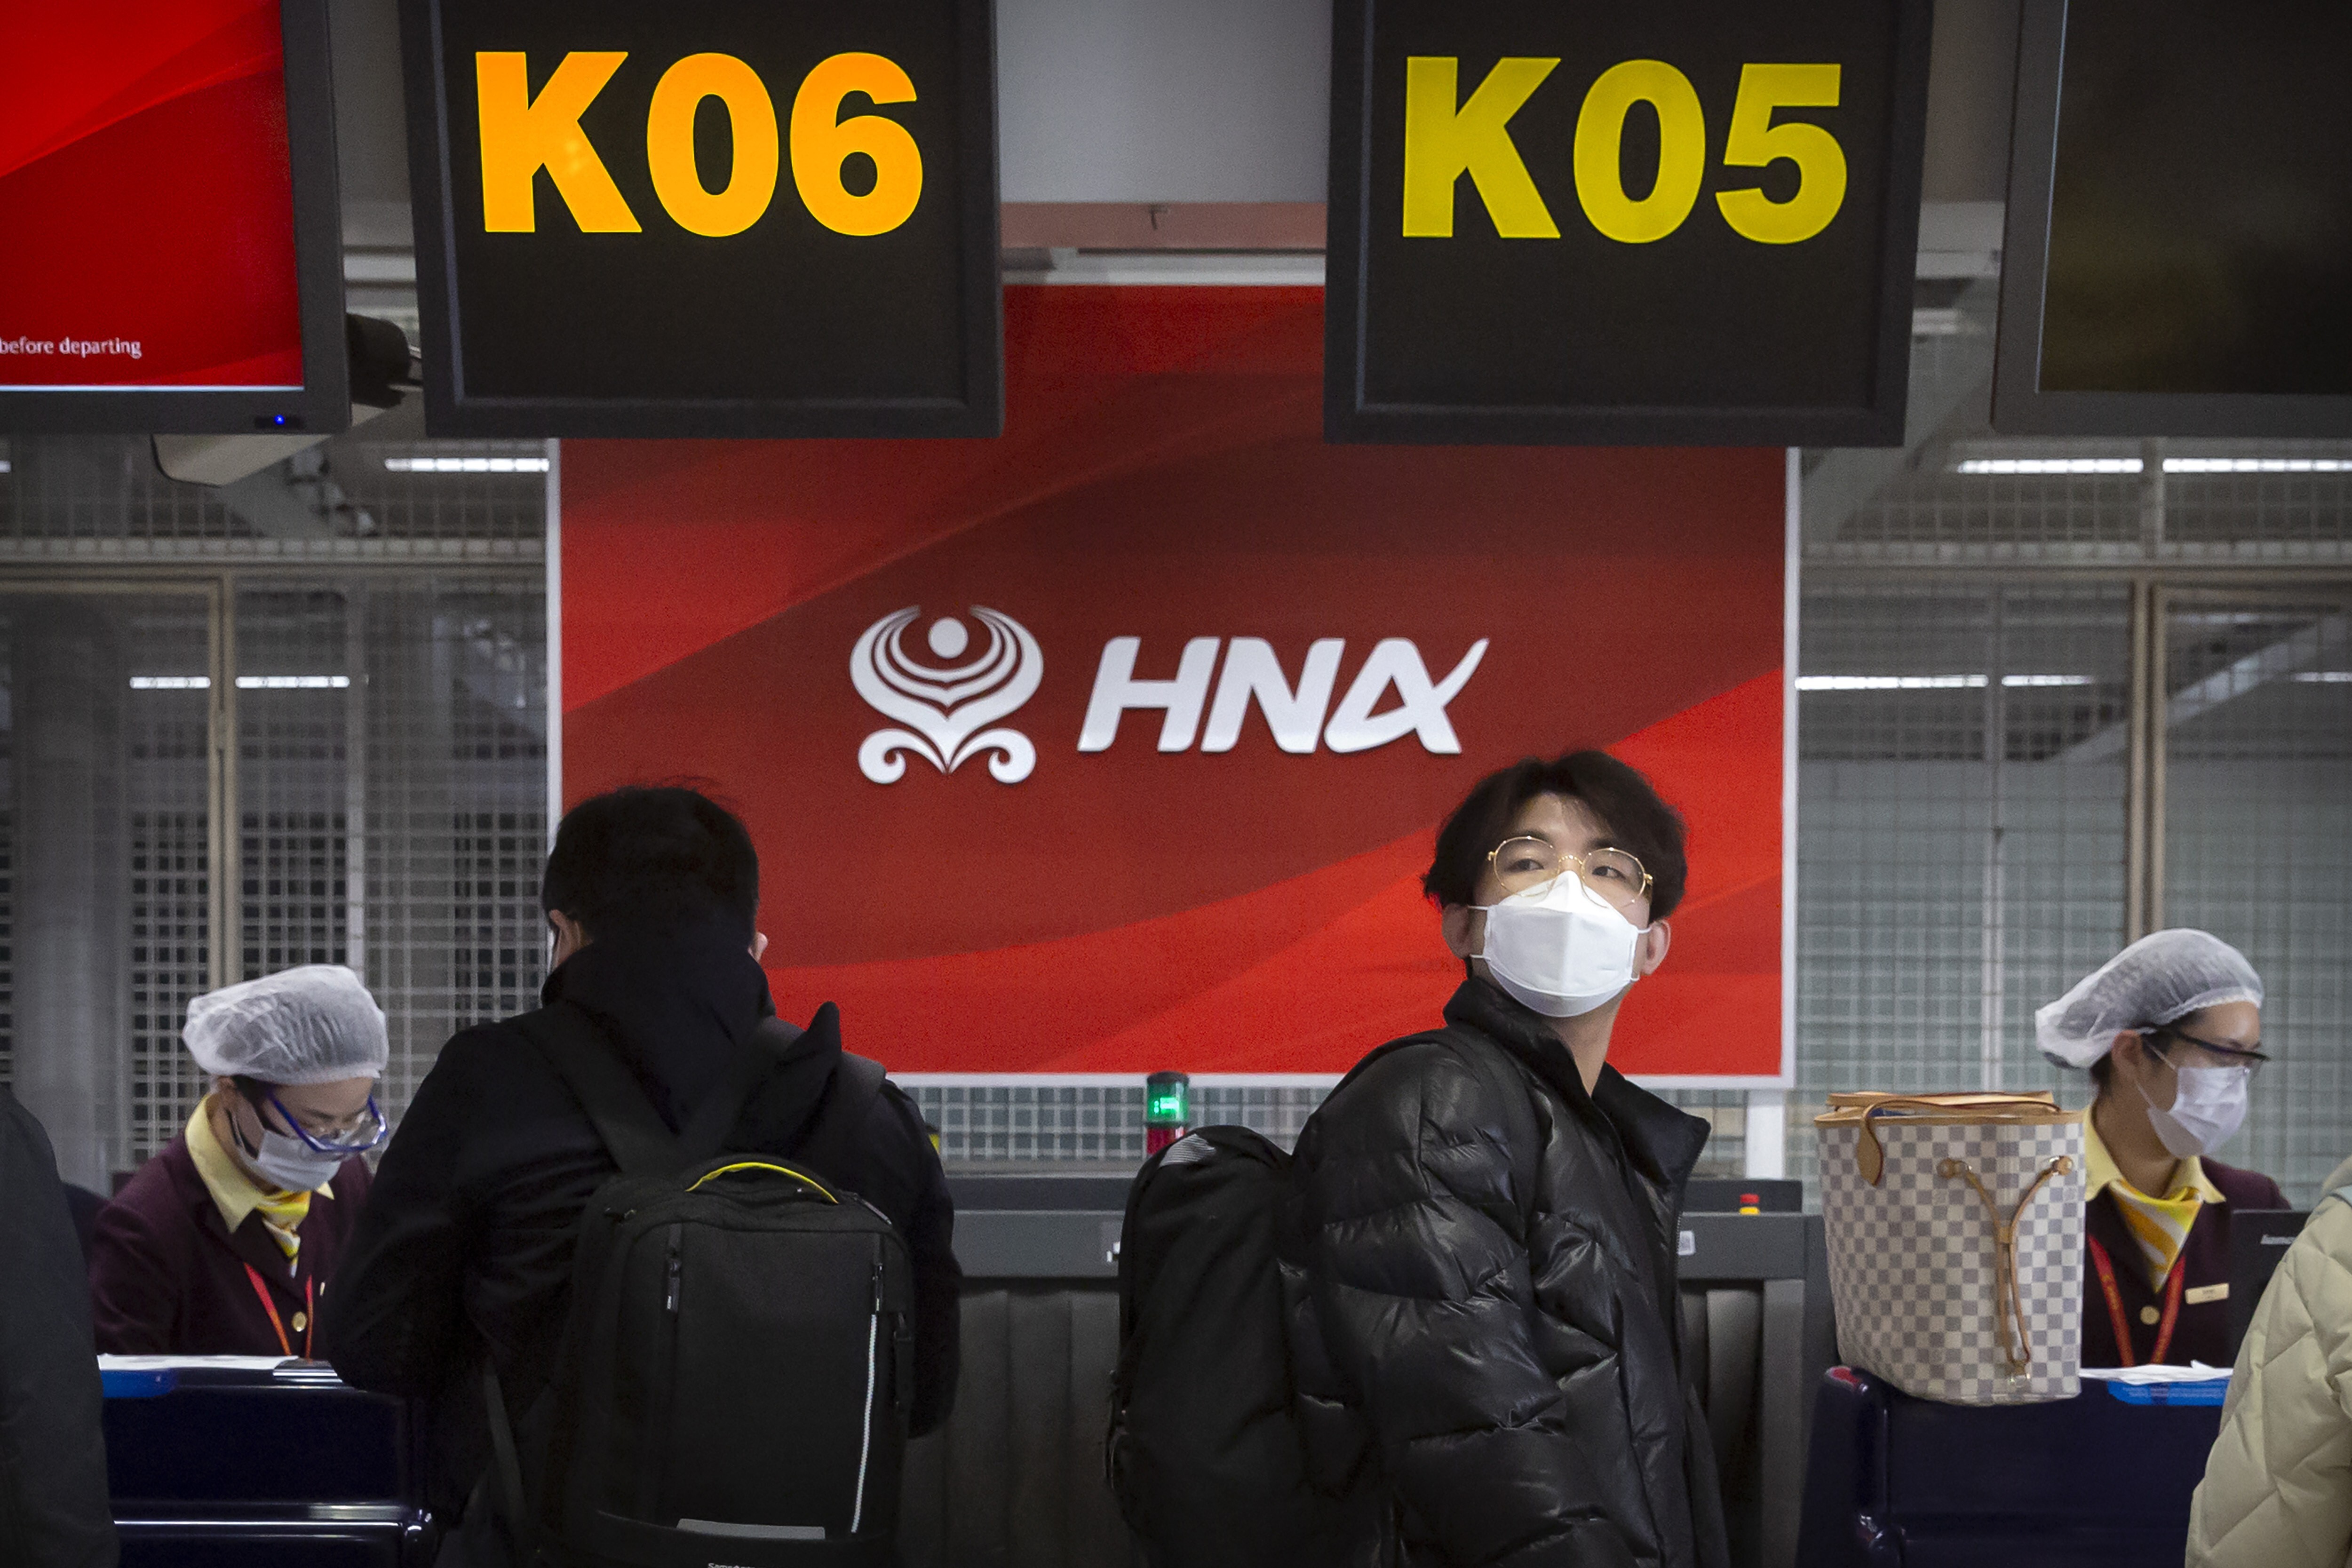 The check-in counter of Hainan Airlines at the Beijing Capital International Airport on March 6, 2020. Photo: AP